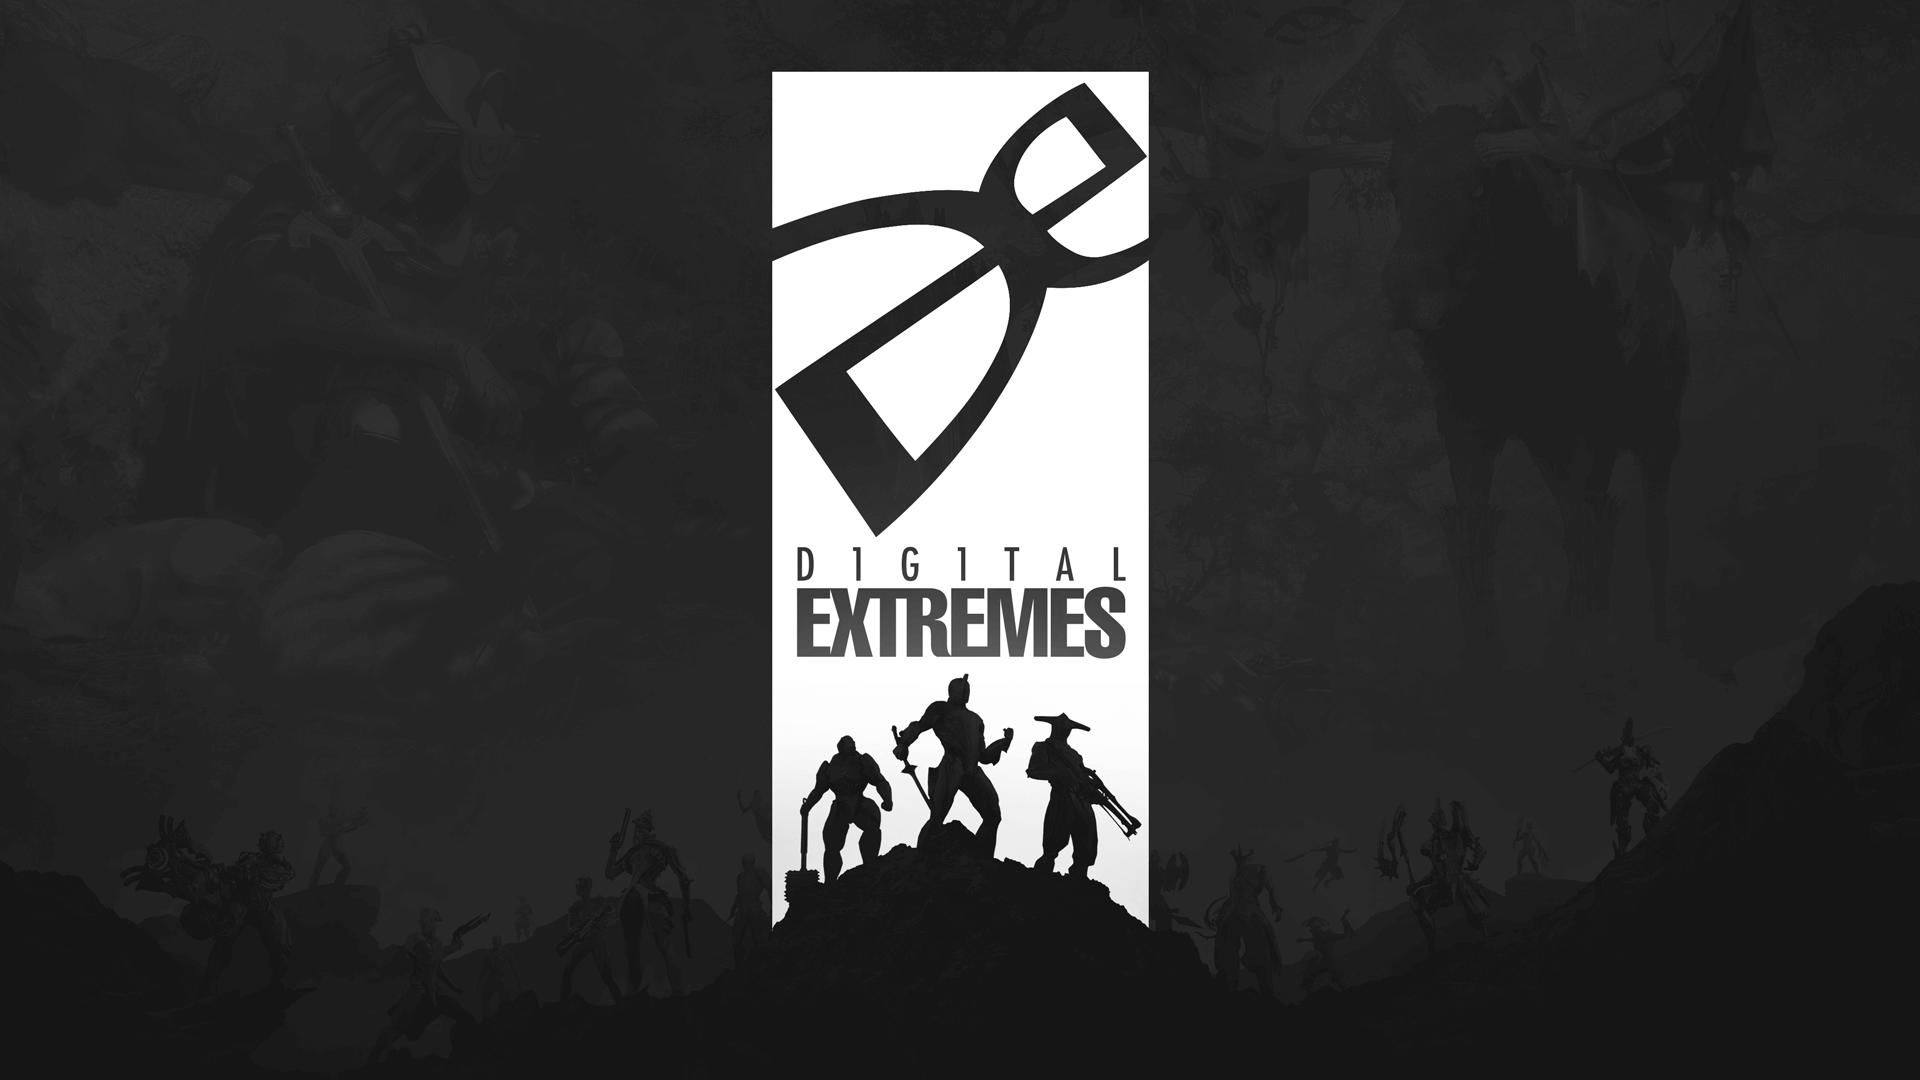 Digital Extremes’ Closure Of External Project Division Rendered 30 Employees Jobless